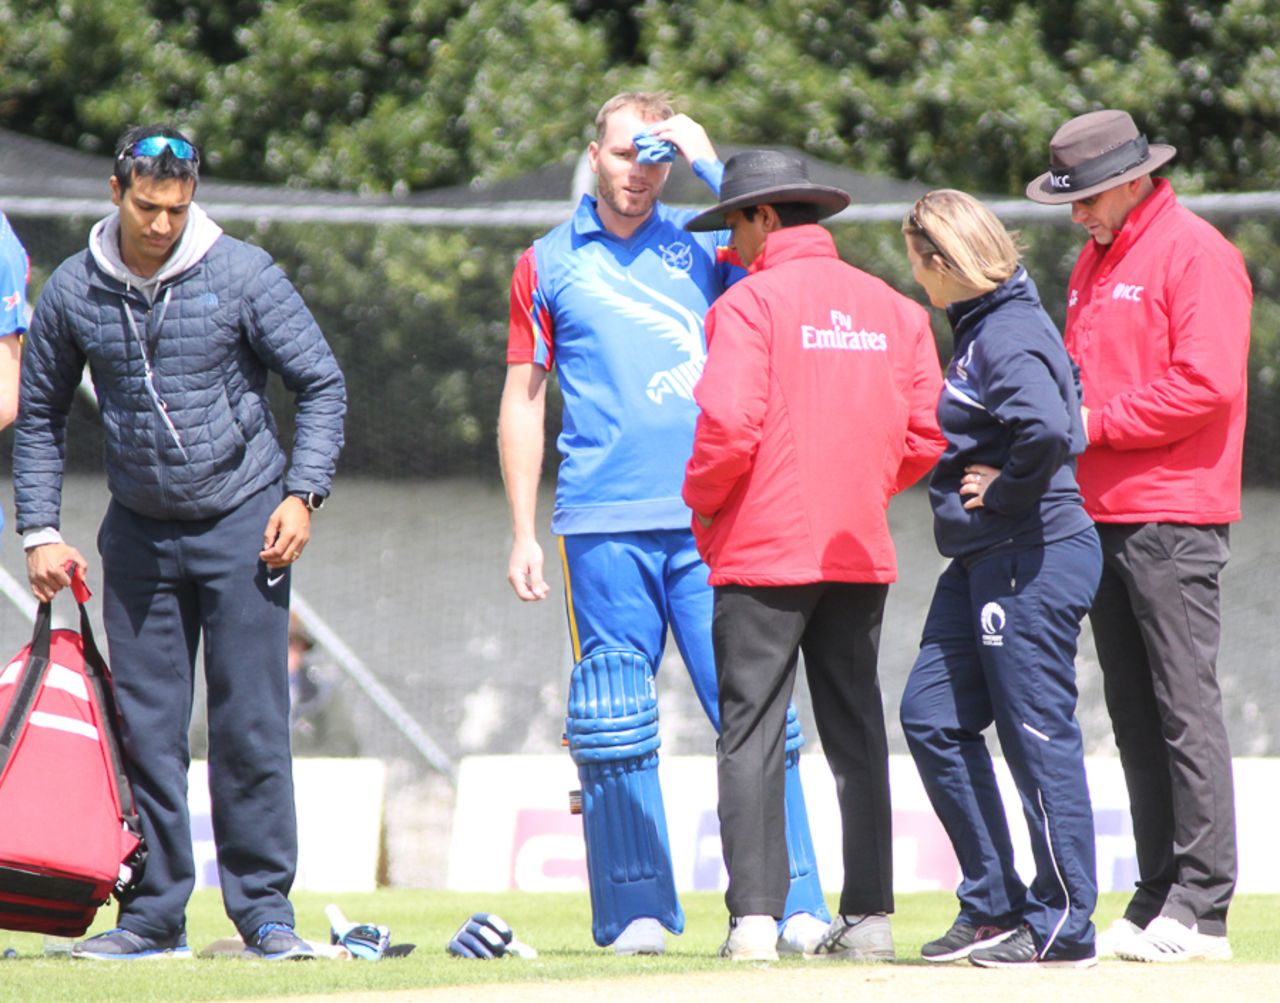 Christi Viljoen gets an ice pack after being hit in the helmet with a Chris Sole bouncer, Scotland v Namibia, ICC WCL Championship, Edinburgh, June 12, 2017